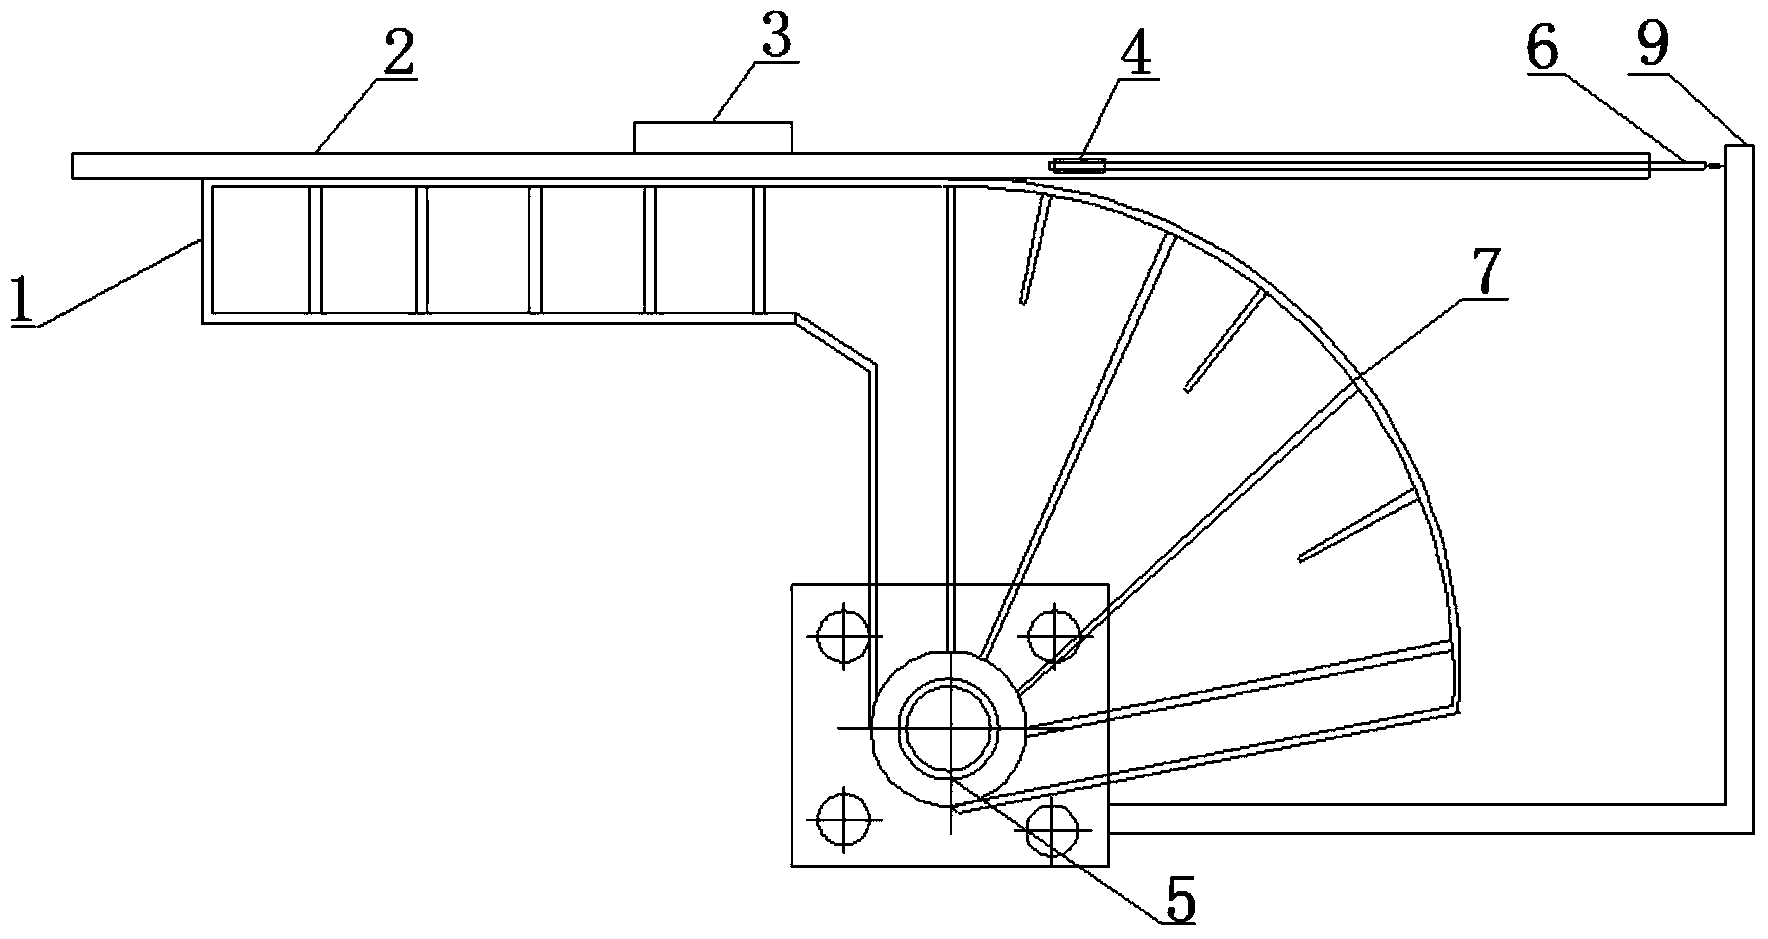 Processing method for section bar roll bending